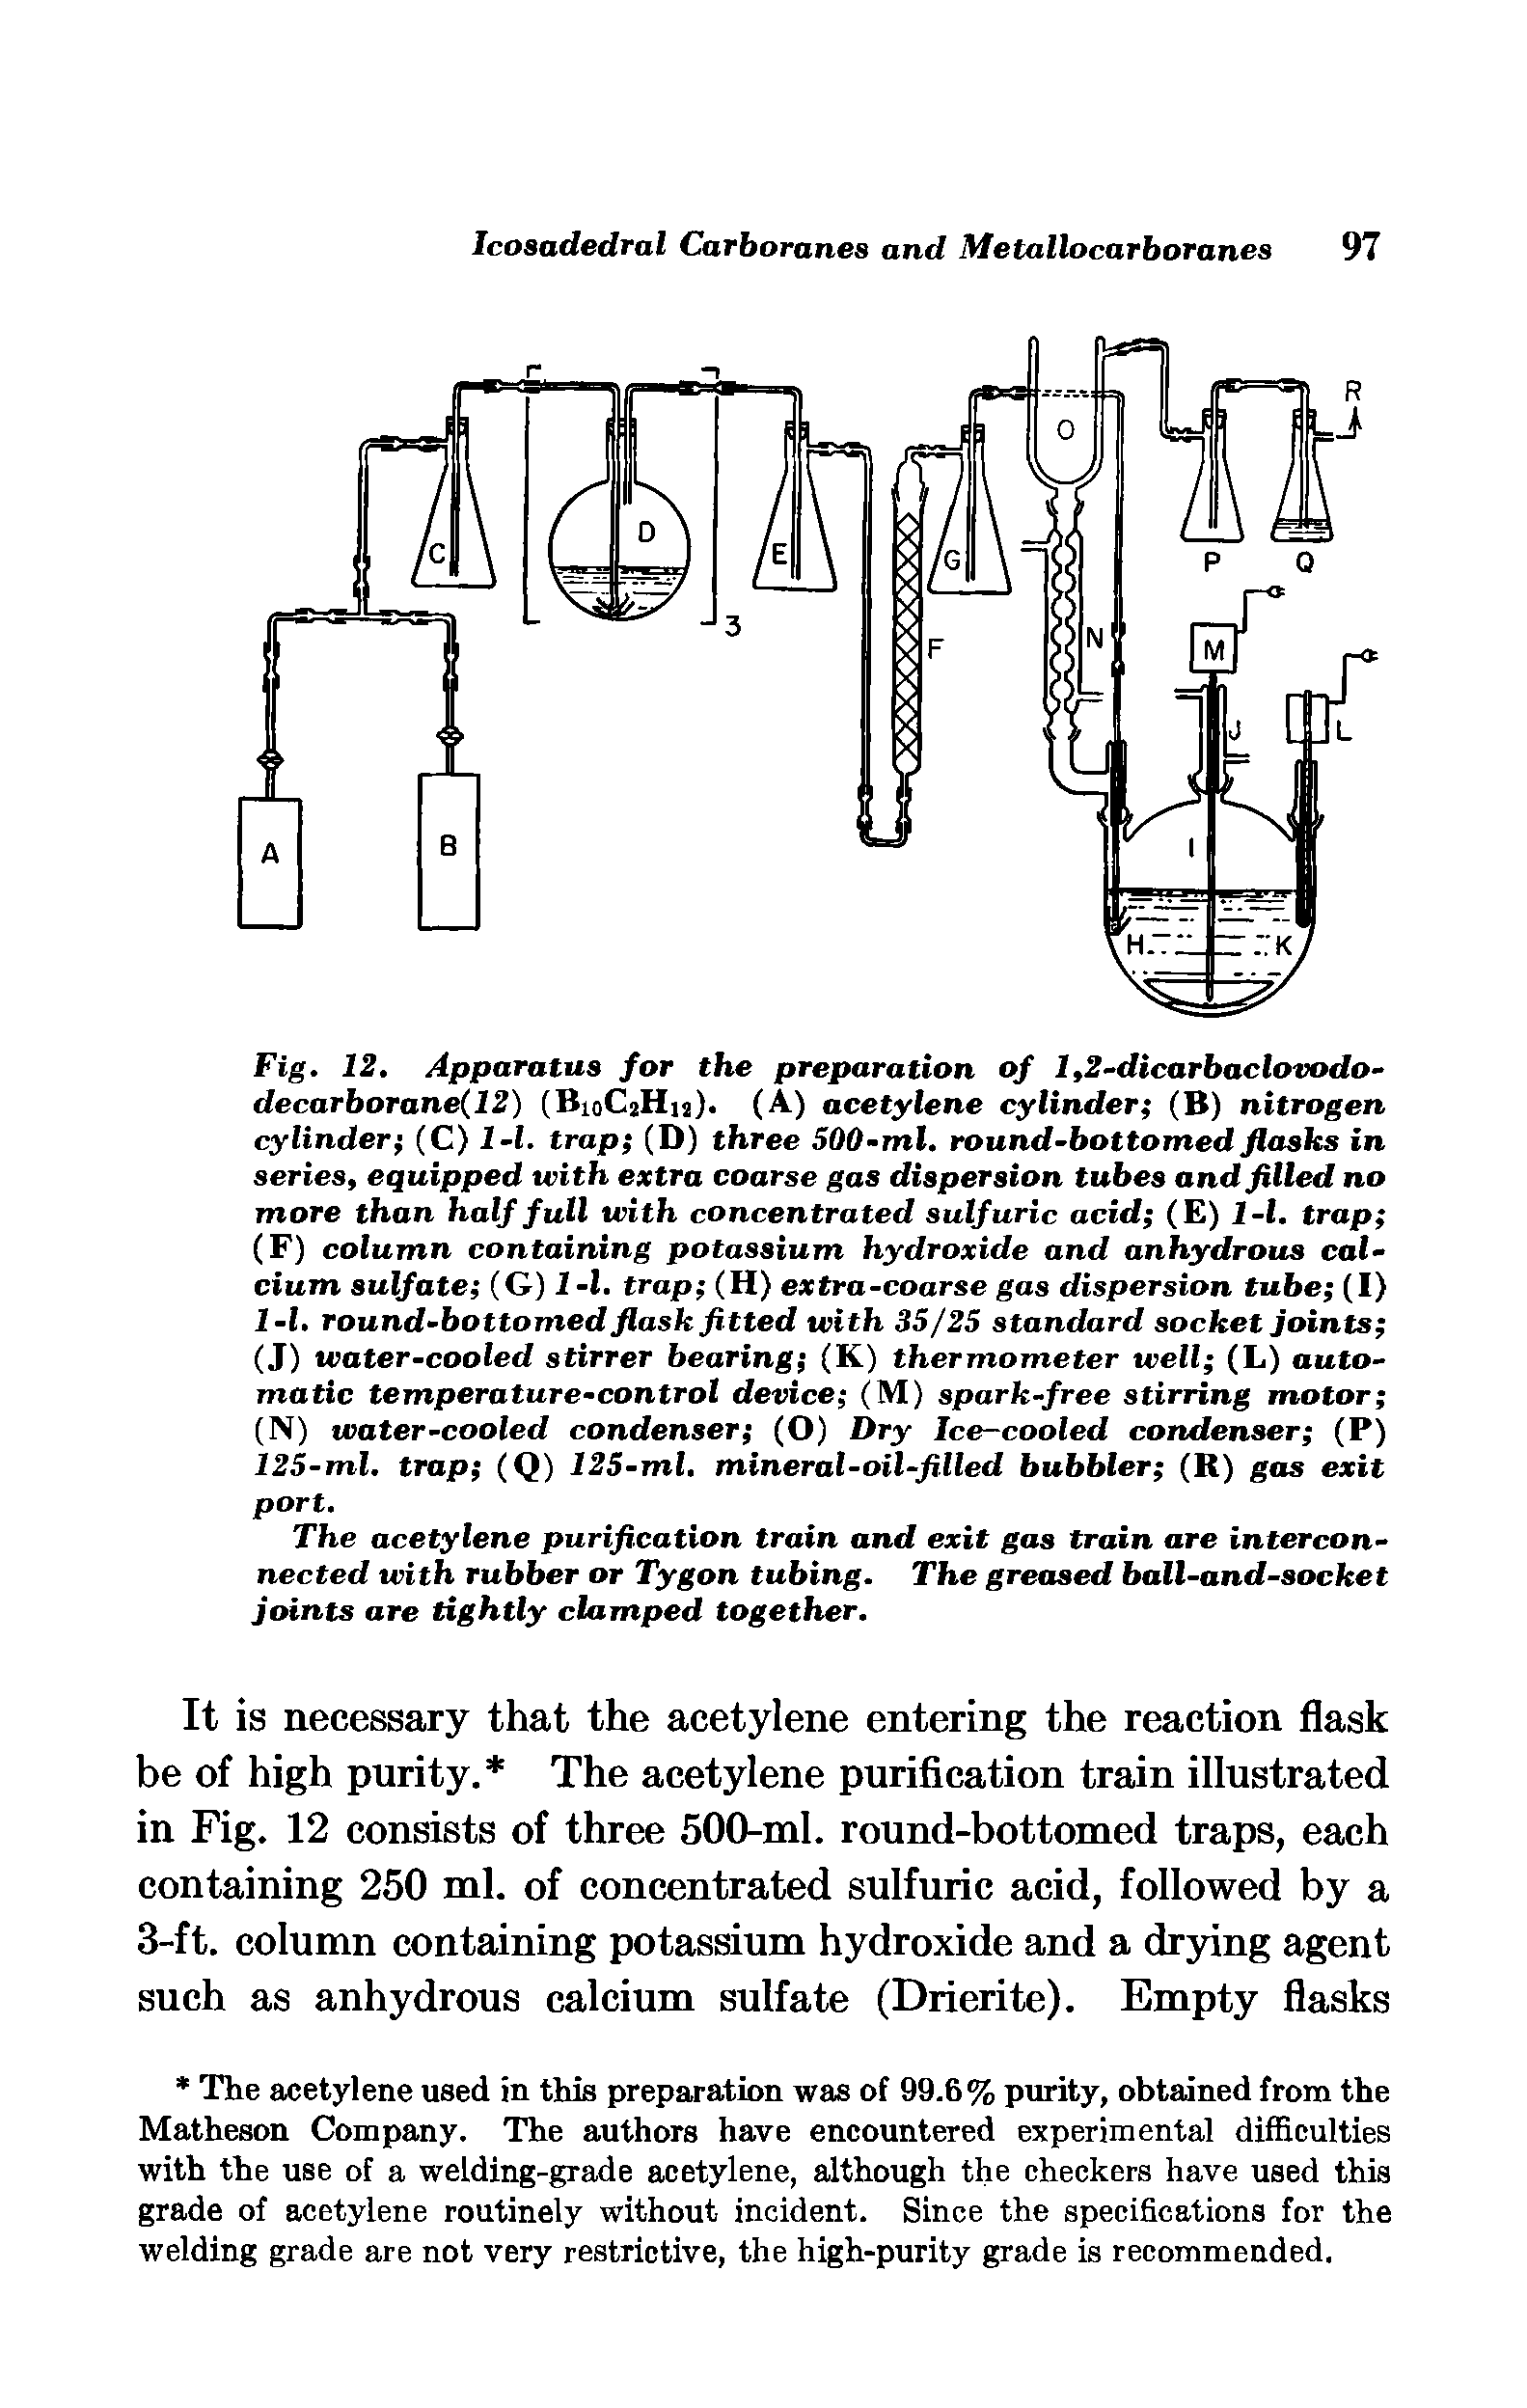 Fig. 12, Apparatus for the preparation of 1,2-dicarbaclovodo-decarborane(12) (BioCjHu). (A) acetylene cylinder (B) nitrogen cylinder (C) l-l. trap (D) three 500-ml. round-bottomed flasks in series, equipped with extra coarse gas dispersion tubes and filled no more than half full with concentrated sulfuric acid (E) l-l. trap (F) column containing potassium hydroxide and anhydrous calcium sulfate (G) 1 -1. trap (H) extra-coarse gas dispersion tube (I) l-l, round-bottomed flask fitted with 35/25 standard socket Joints (J) water-cooled stirrer bearing (K) thermometer well (L) automatic temperature-control device (M) spark-free stirring motor (N) water-cooled condenser (O) Dry Ice-cooled condenser (P) 125-ml, trap (Q) 125-ml, mineral-oil-filled bubbler (R) gas exit port.